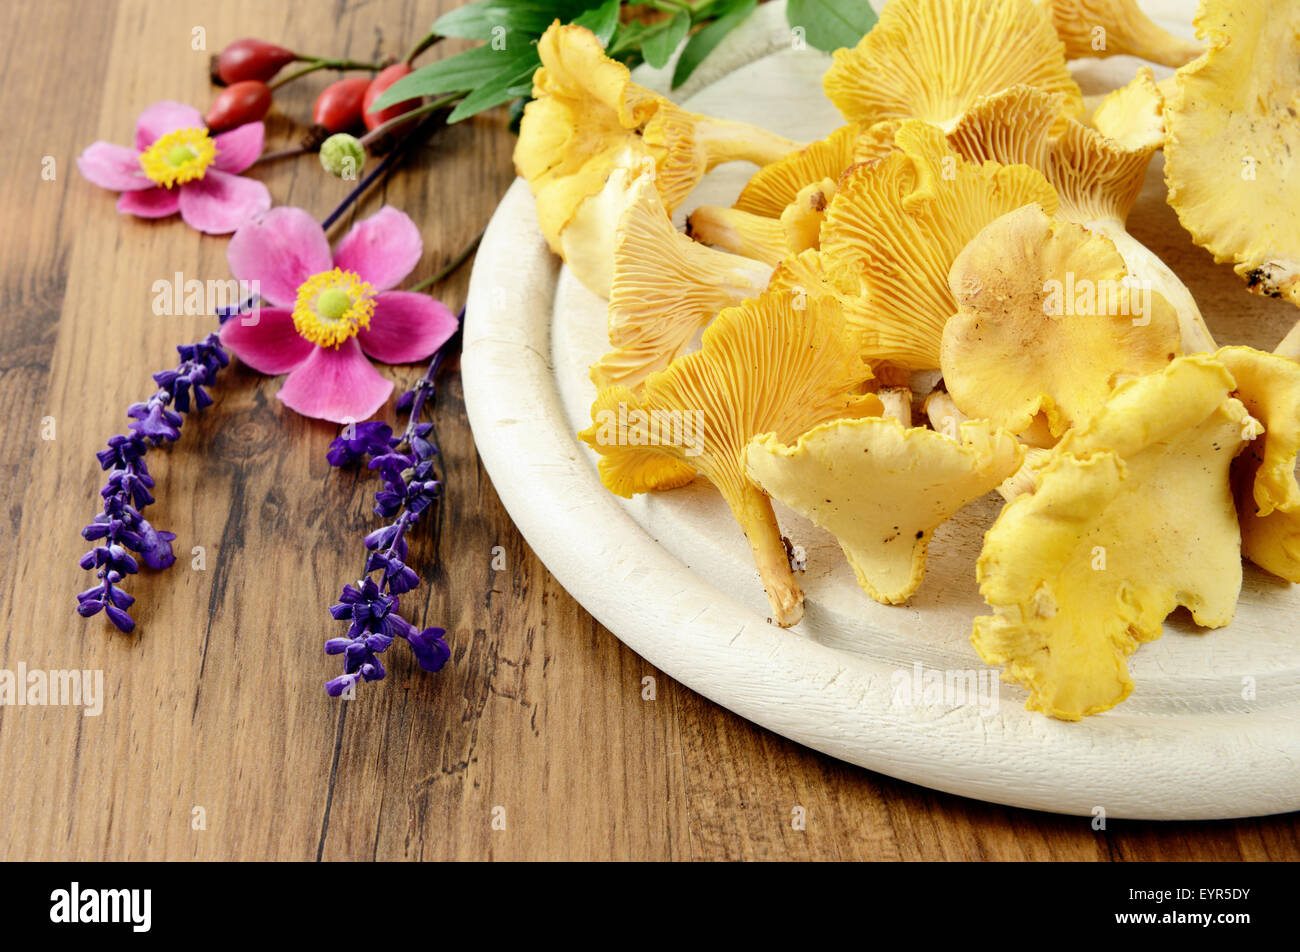 golden chanterelle mushrooms with sage flower on a wooden table with anemone flowers Stock Photo